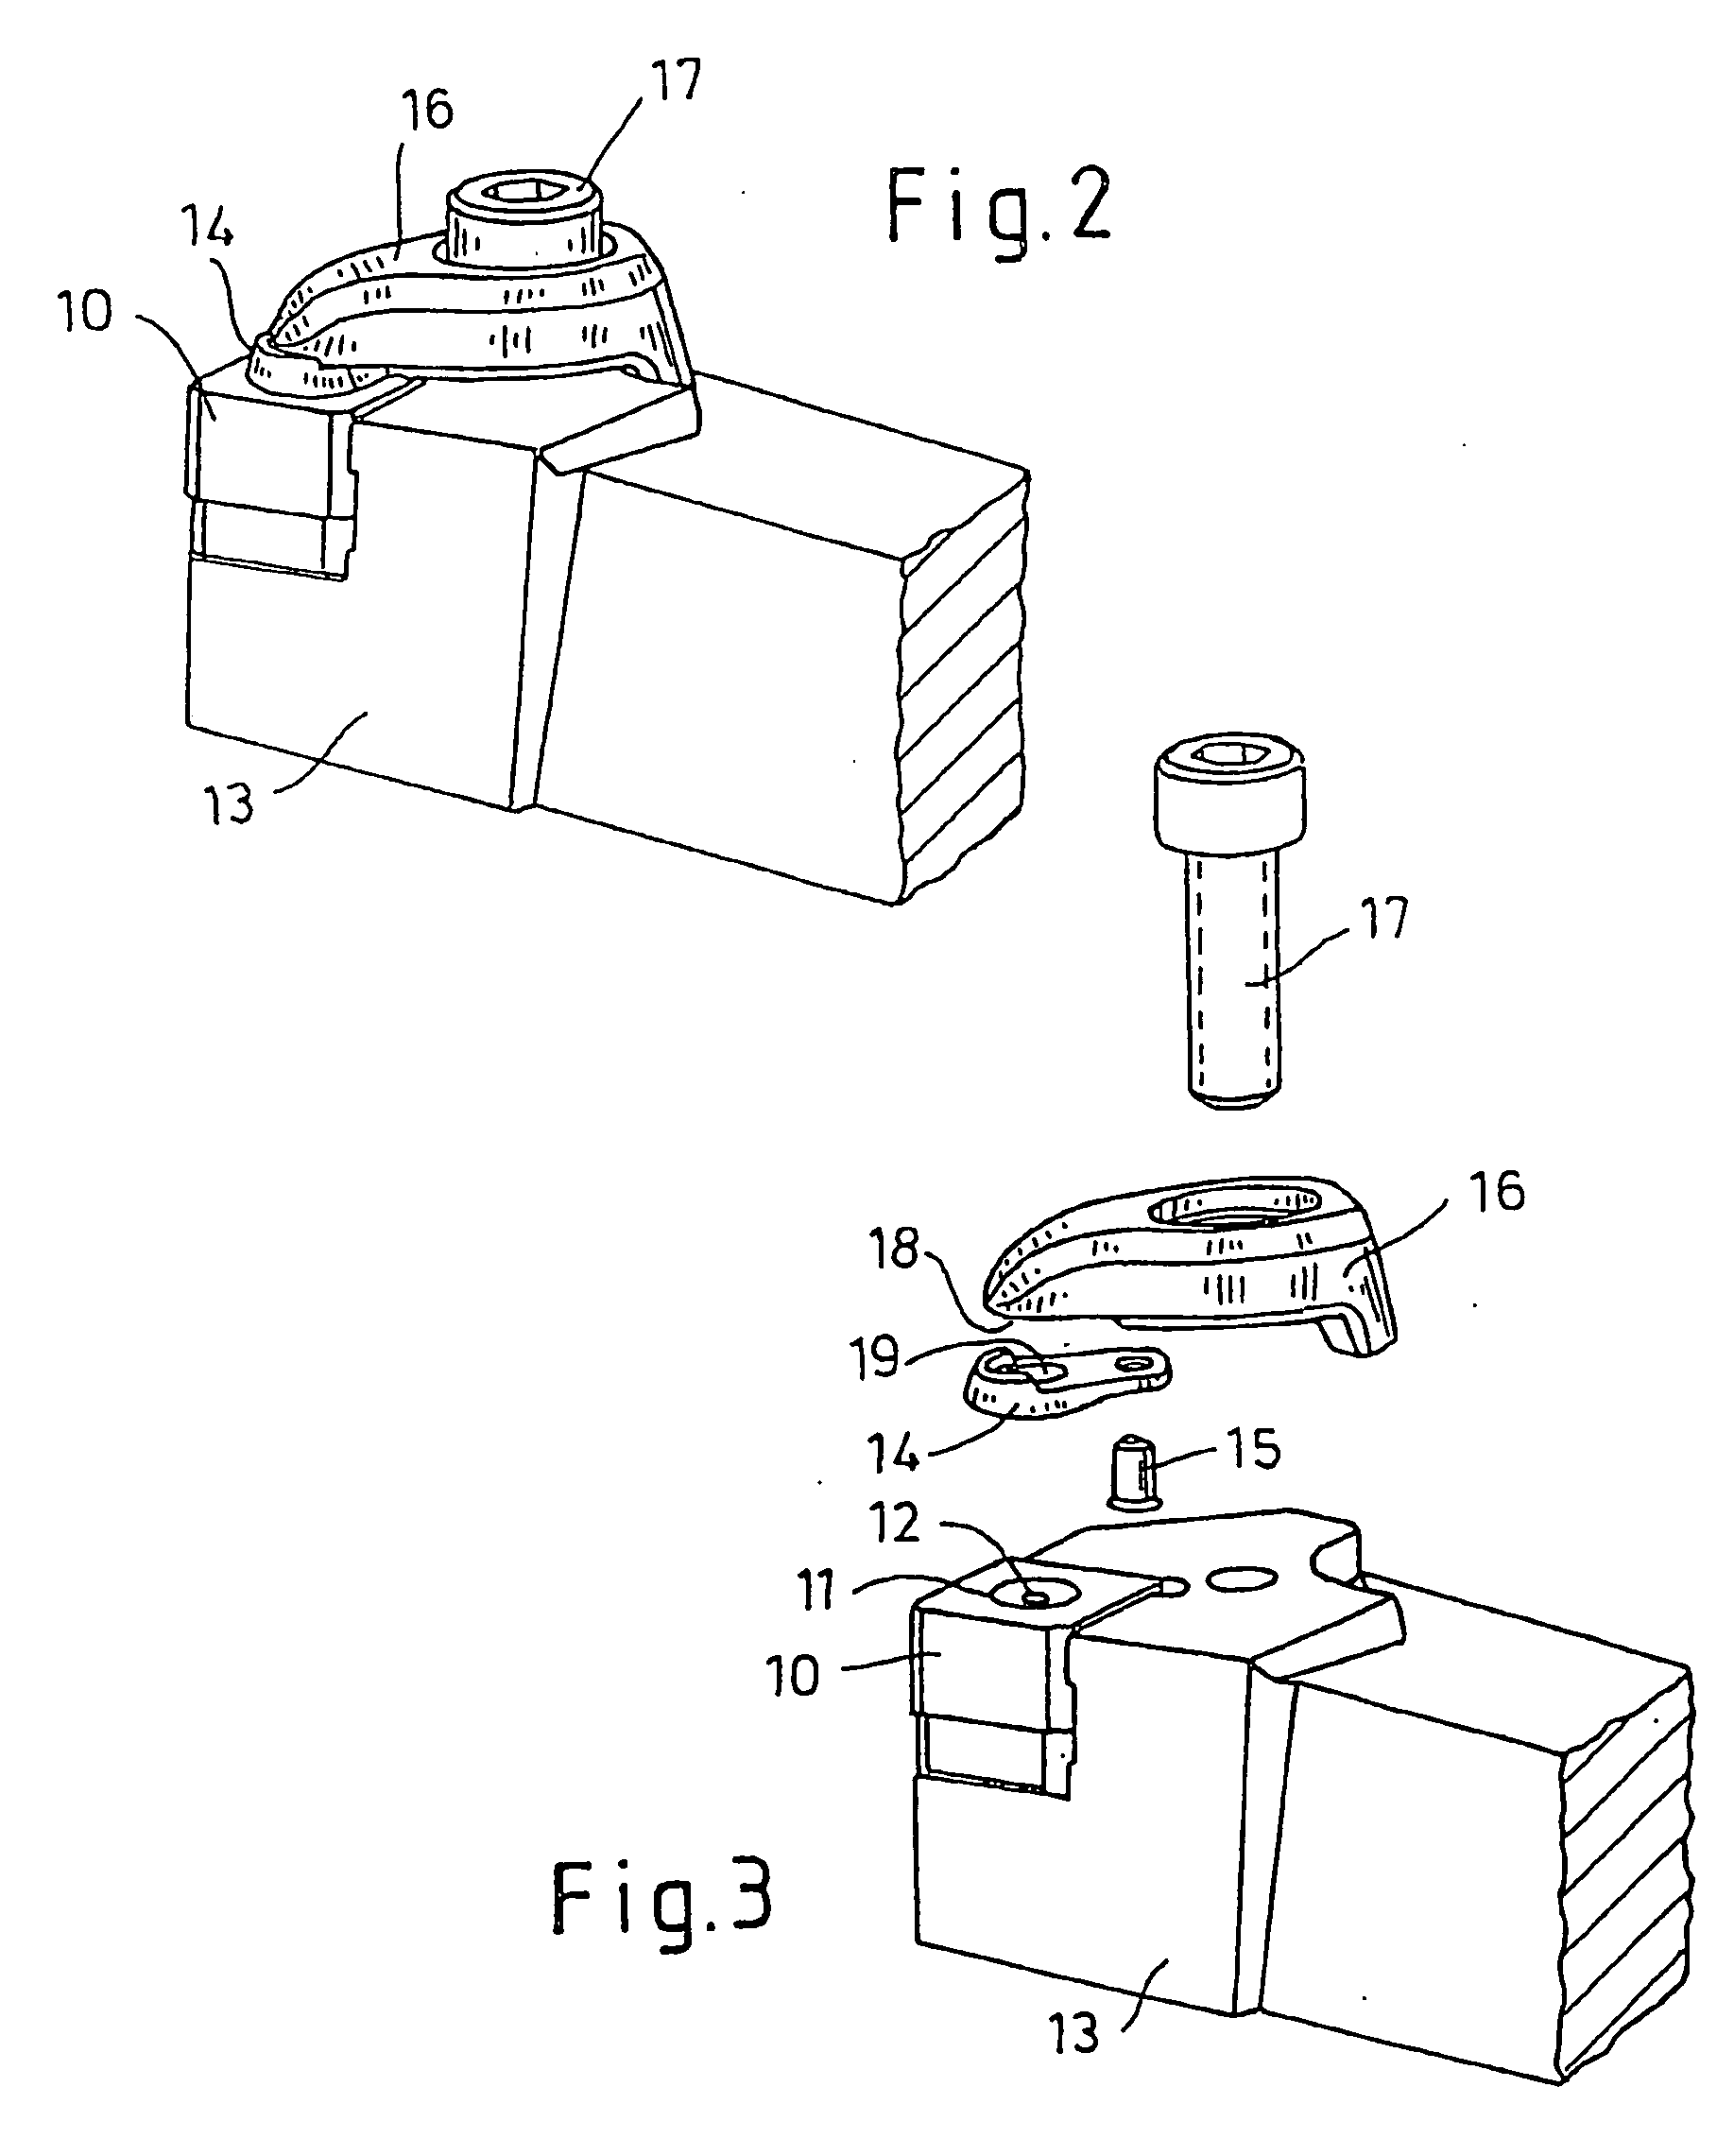 Metal cutting tool and cutting plate provided in the shape of a donut